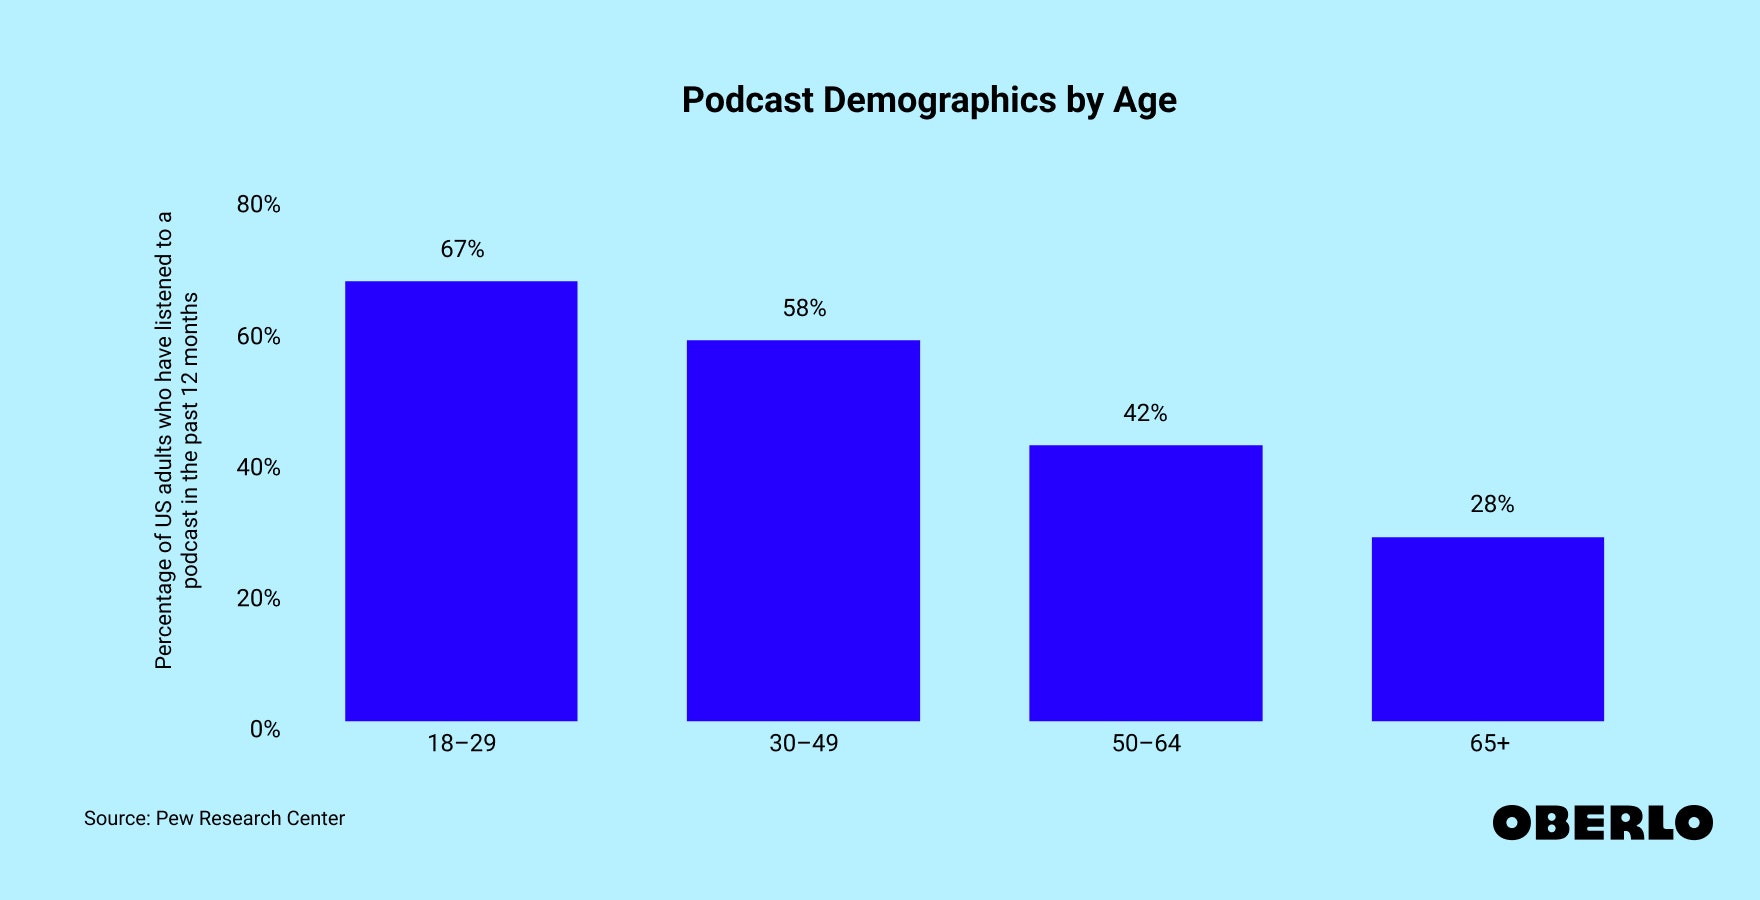 Chart showing podcast listeners' demographic by age